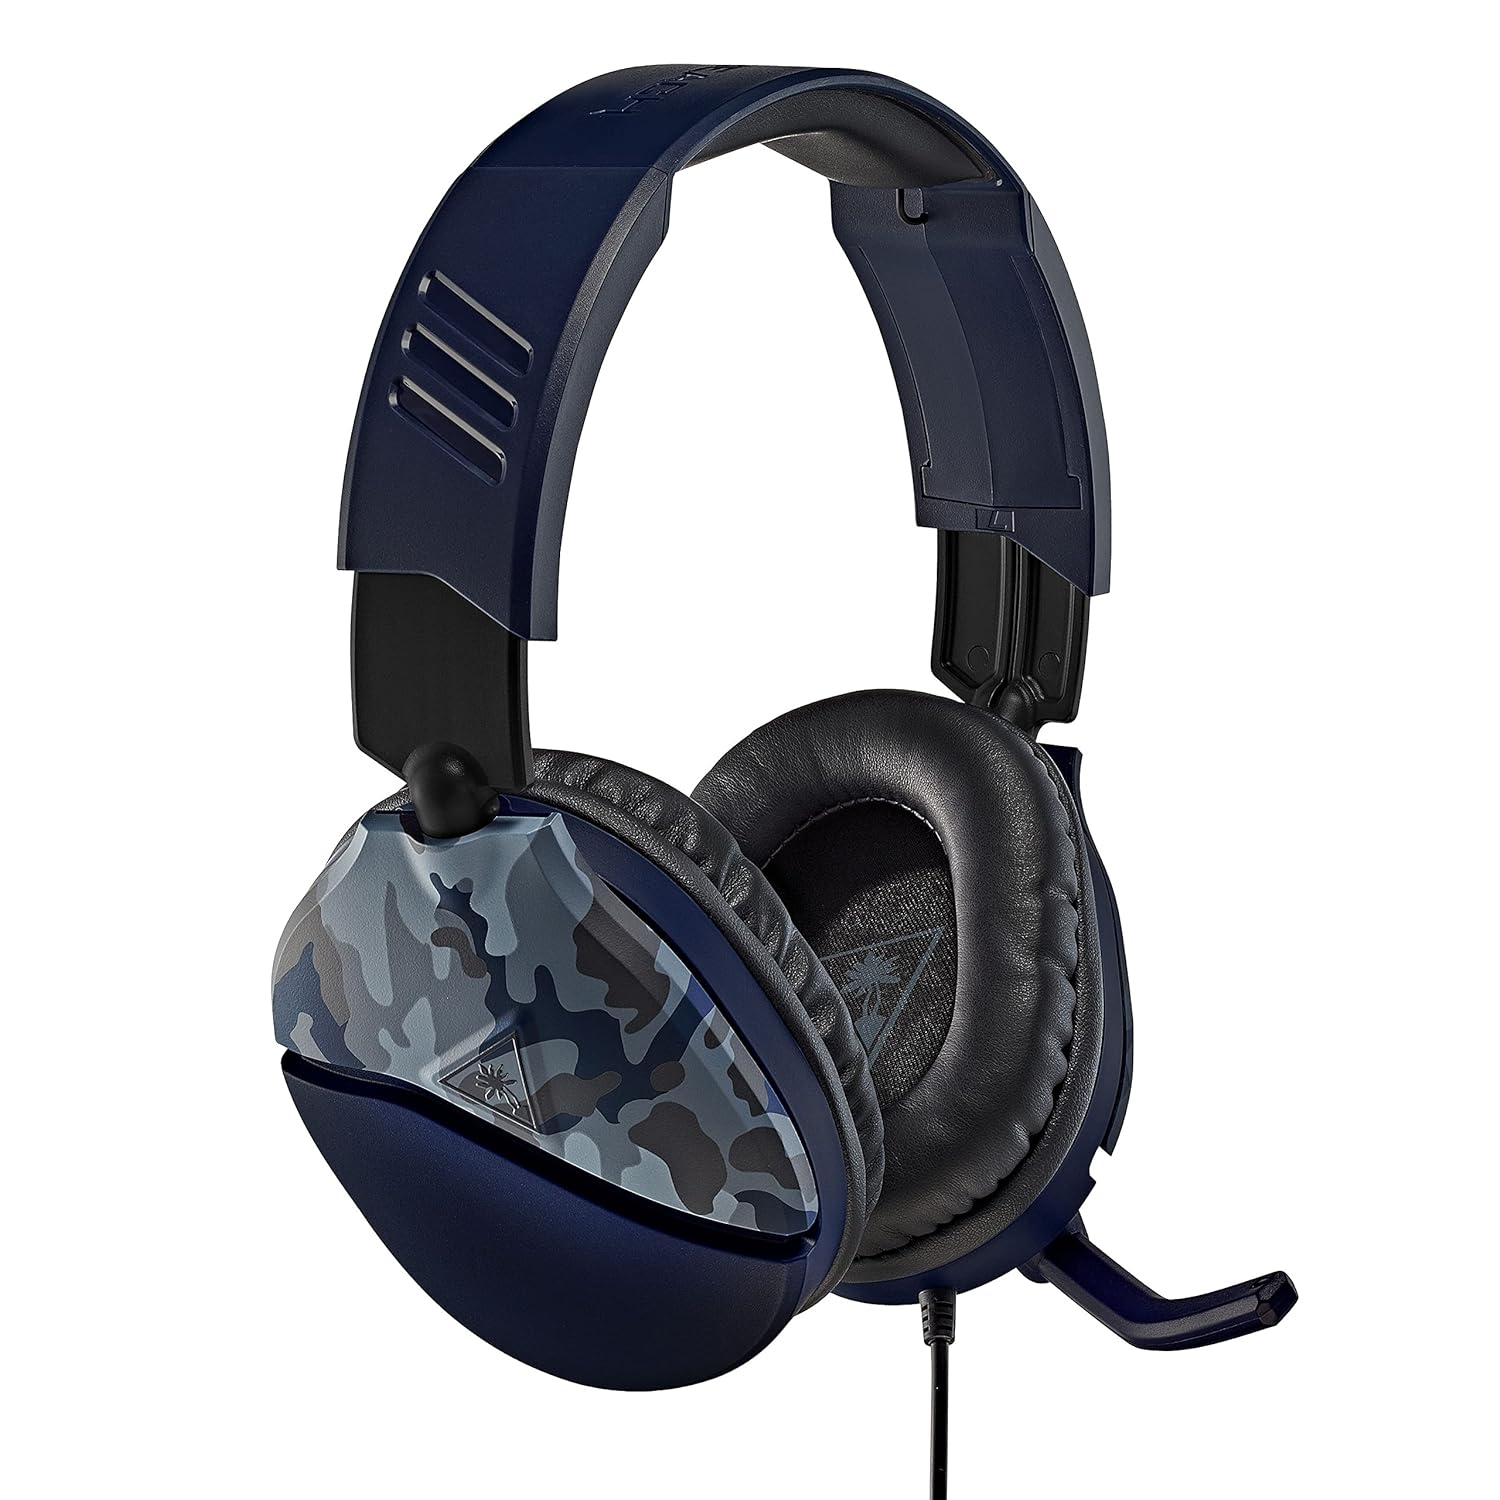 Turtle Beach Recon 70 Multiplatform Gaming Headset for Xbox Series X|S, PS5, Nintendo Switch, PC, Mobile w/ 3.5mm Wired Connection – Flip-to-Mute Mic, 40mm Speakers, Lightweight Design – Blue Camo